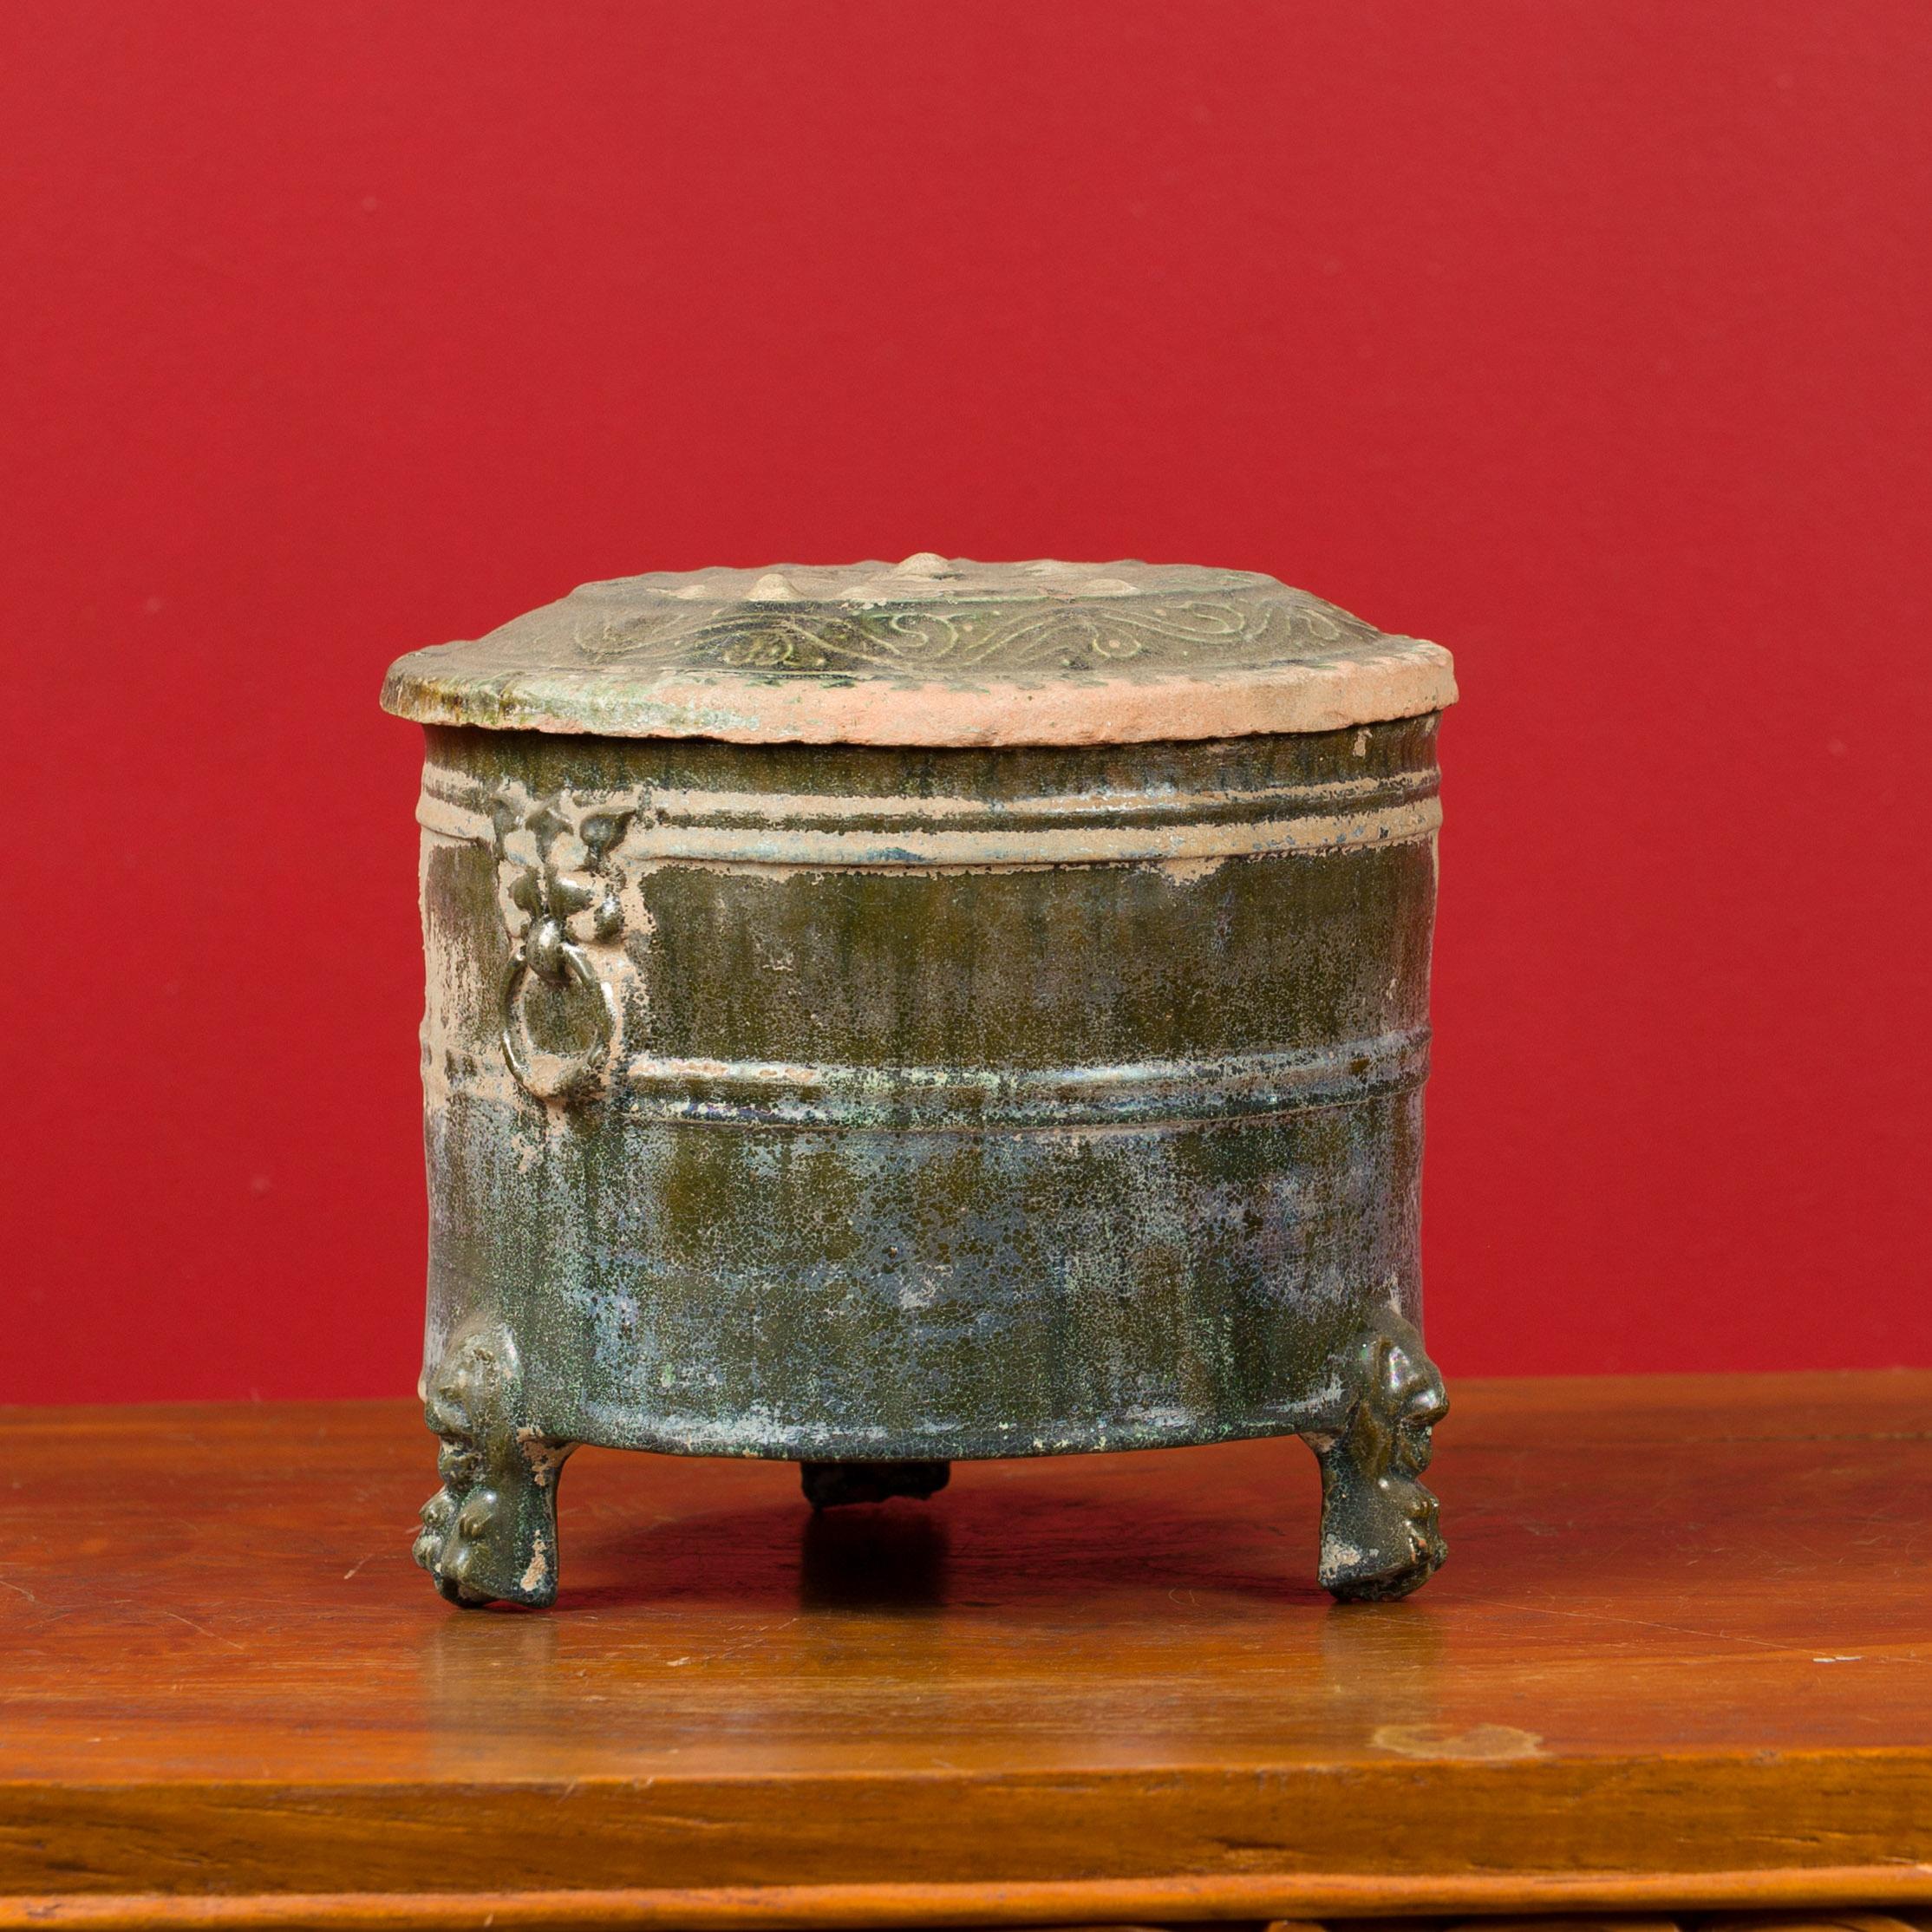 A Chinese Han Dynasty period glazed terracotta lidded vessel, circa 202 BC-200 AD. Created in China during the prestigious Han dynasty, this small vessel features a circular lid adorned with radiating and scrolling motifs. Resting on three petite